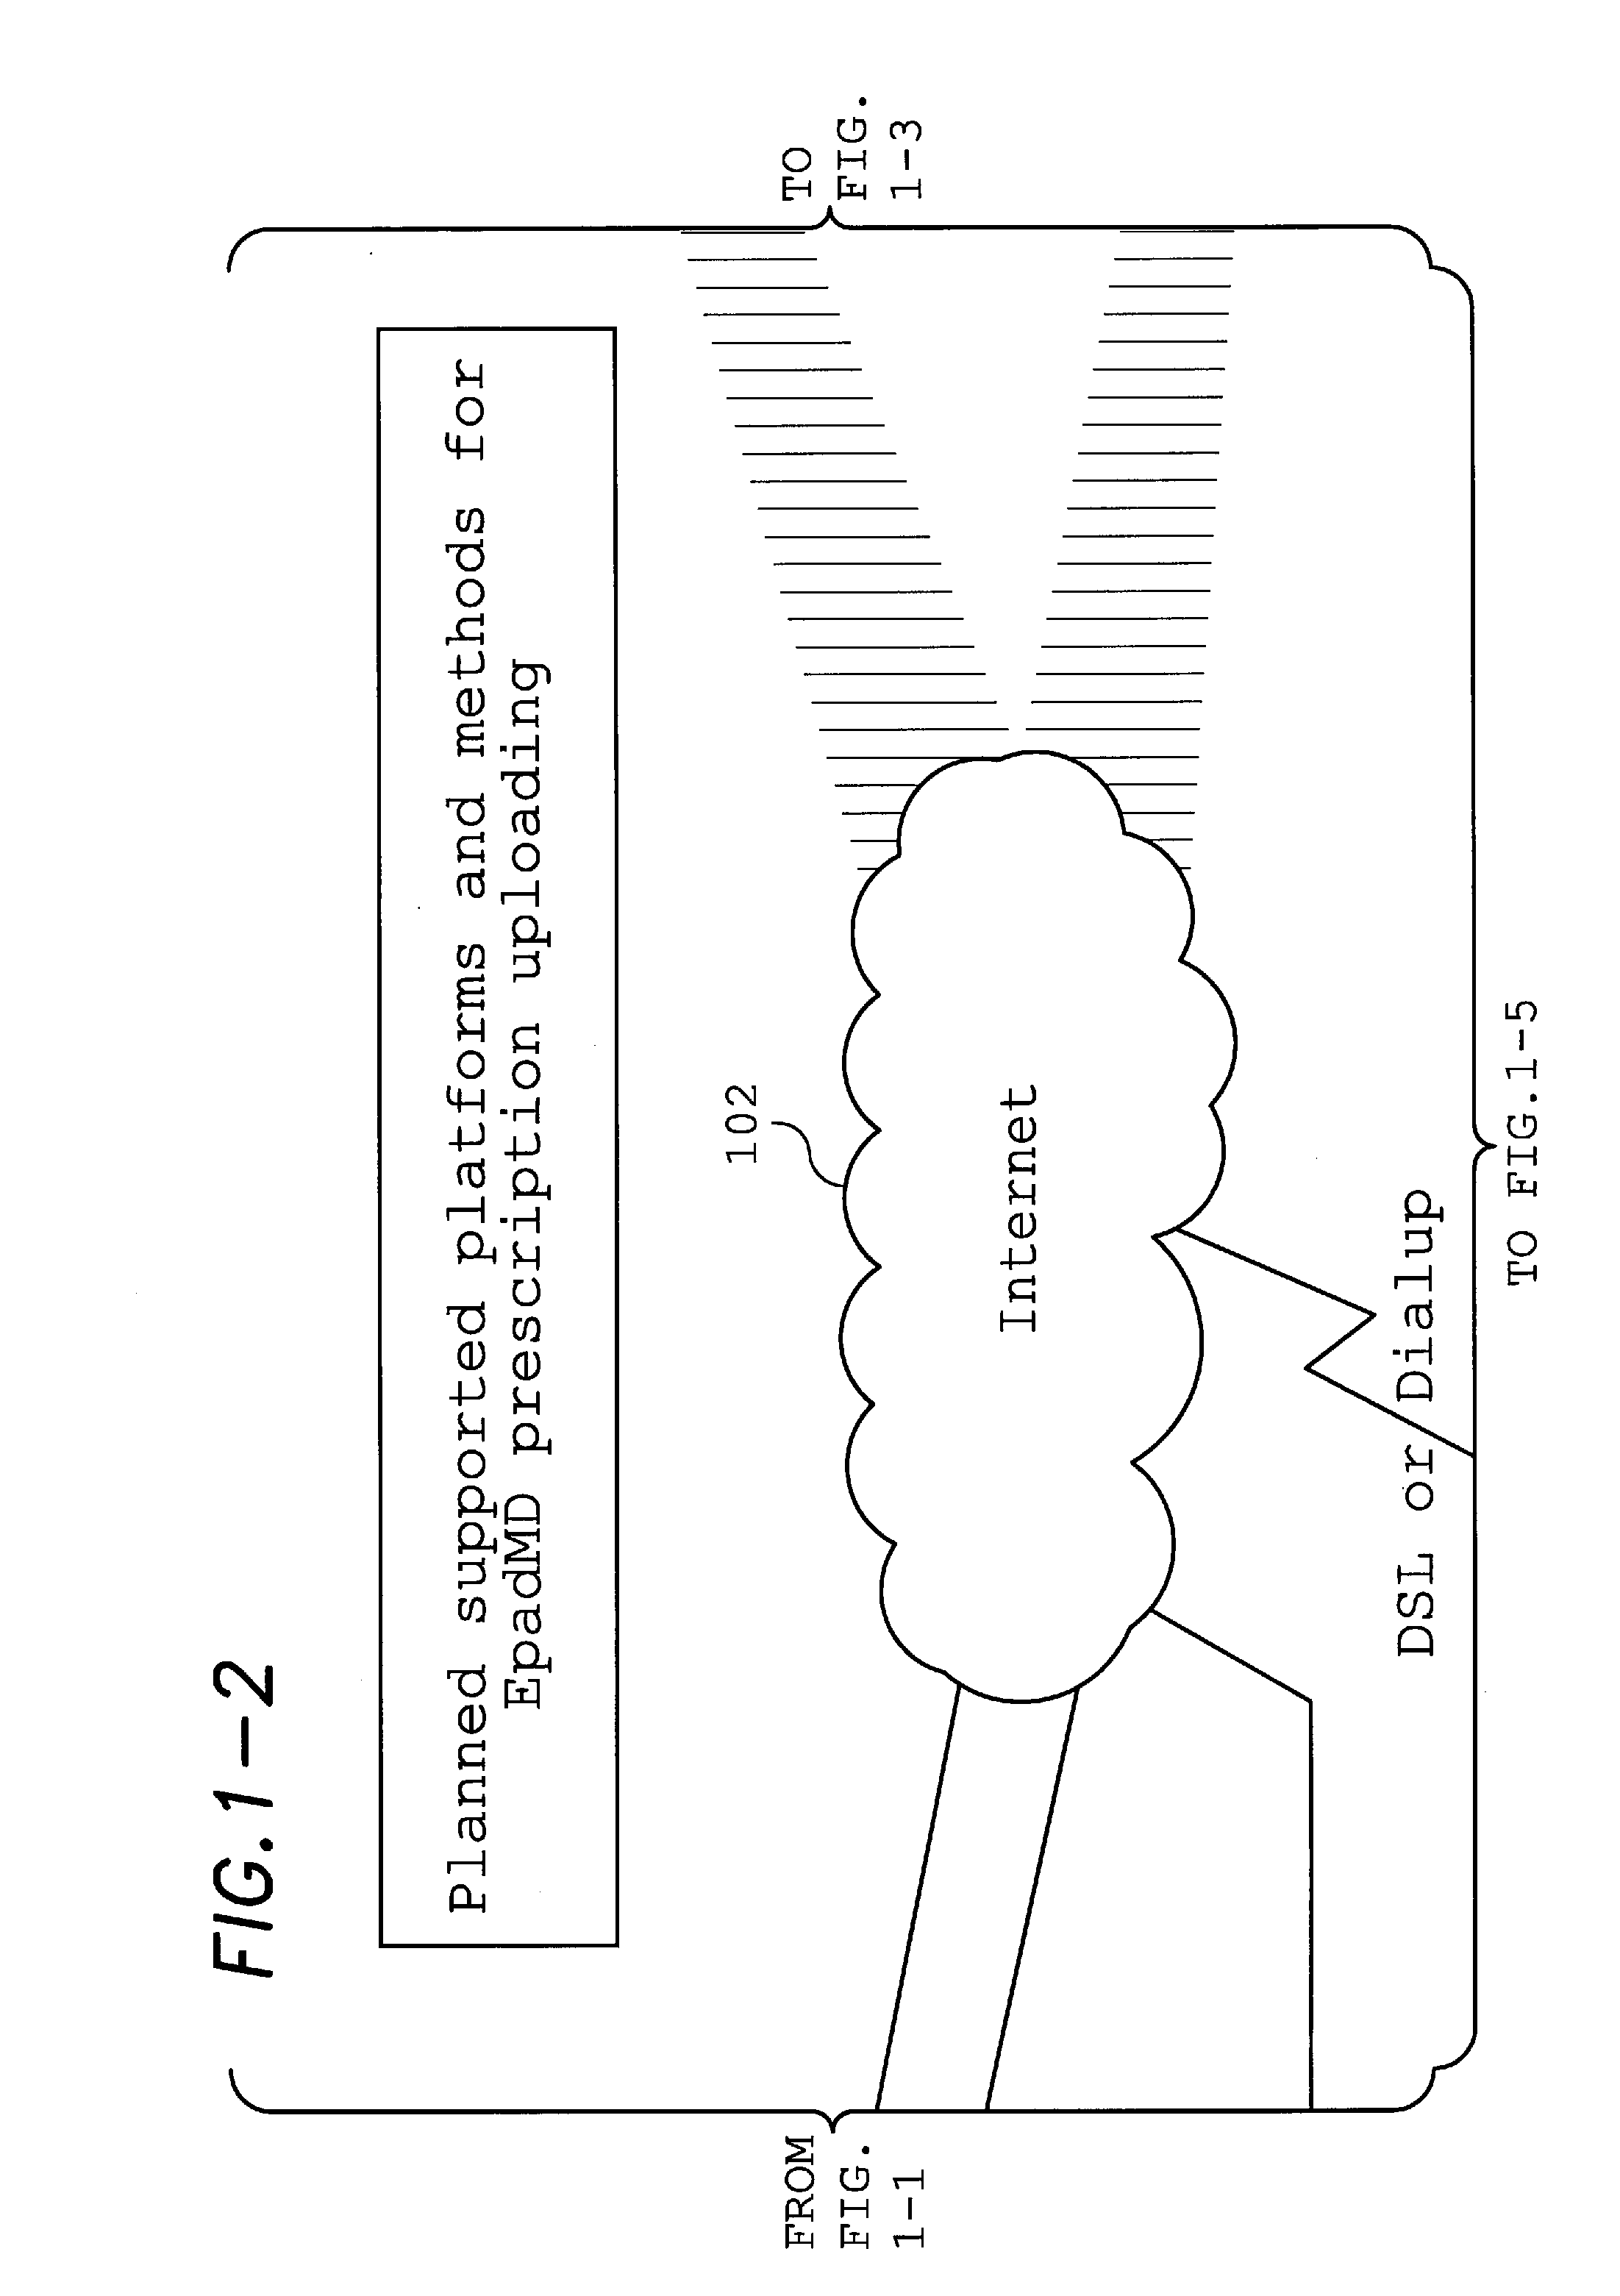 Wireless electronic prescription scanning and management system